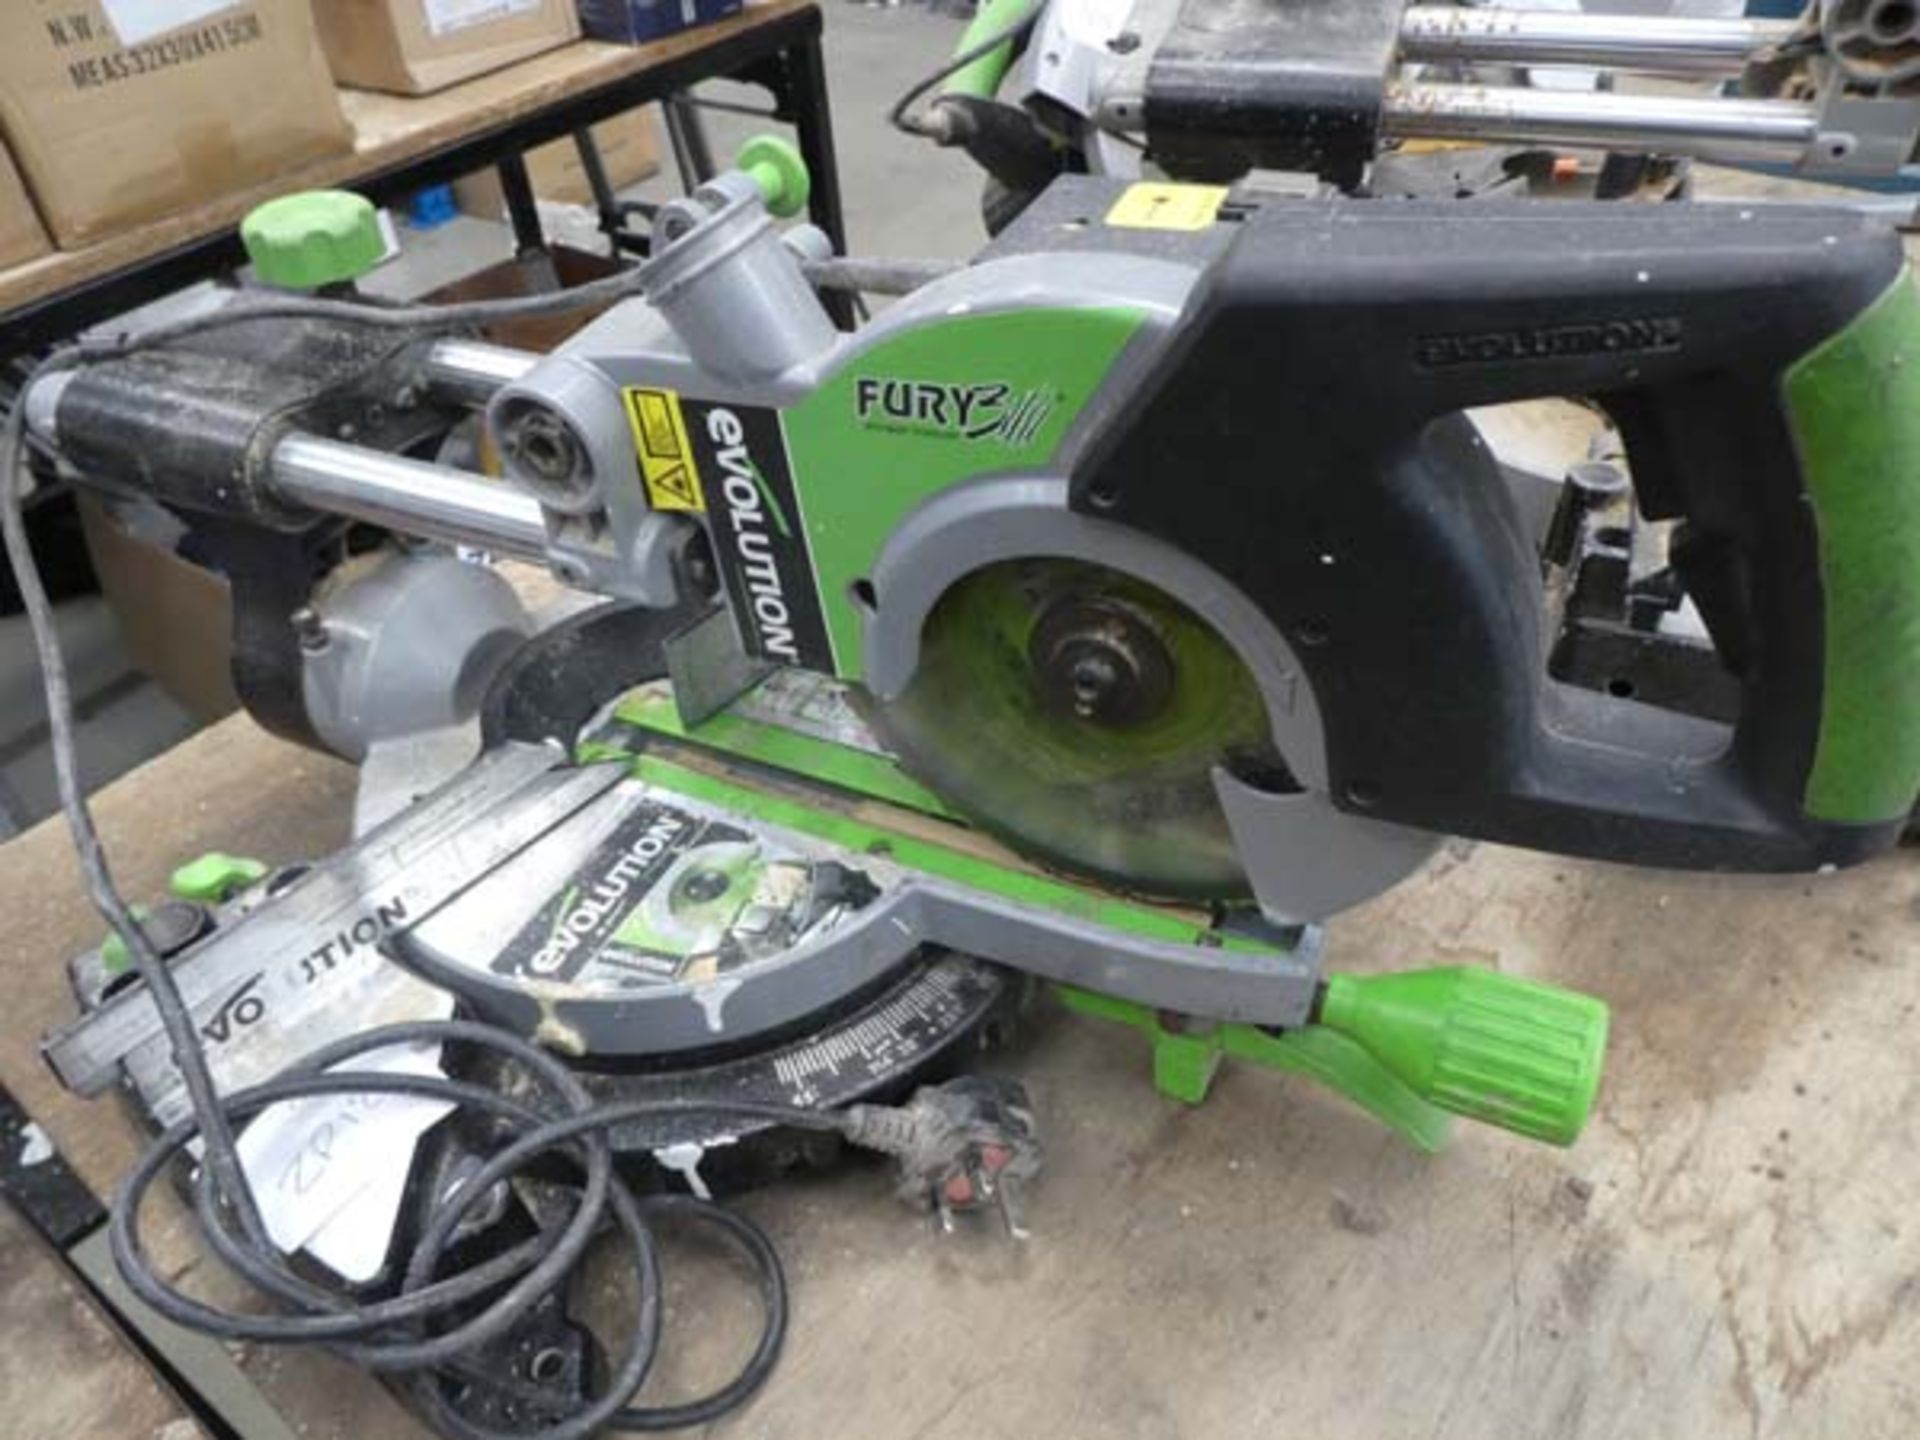 Evolution compound mitre saw Very used, Model GB2438285